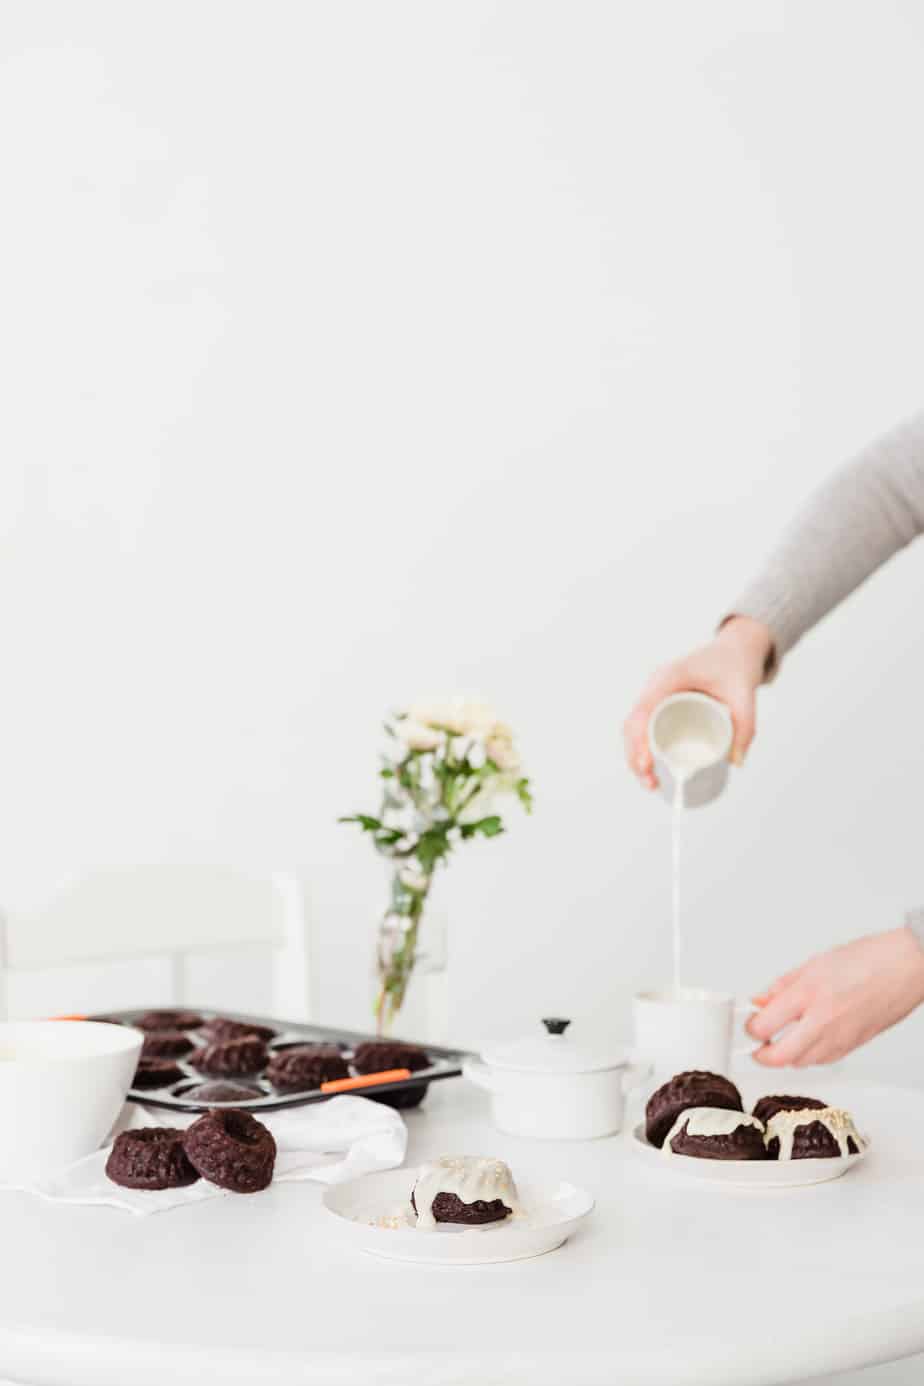 Mini bundt cakes on a white table with a person drinking coffee.